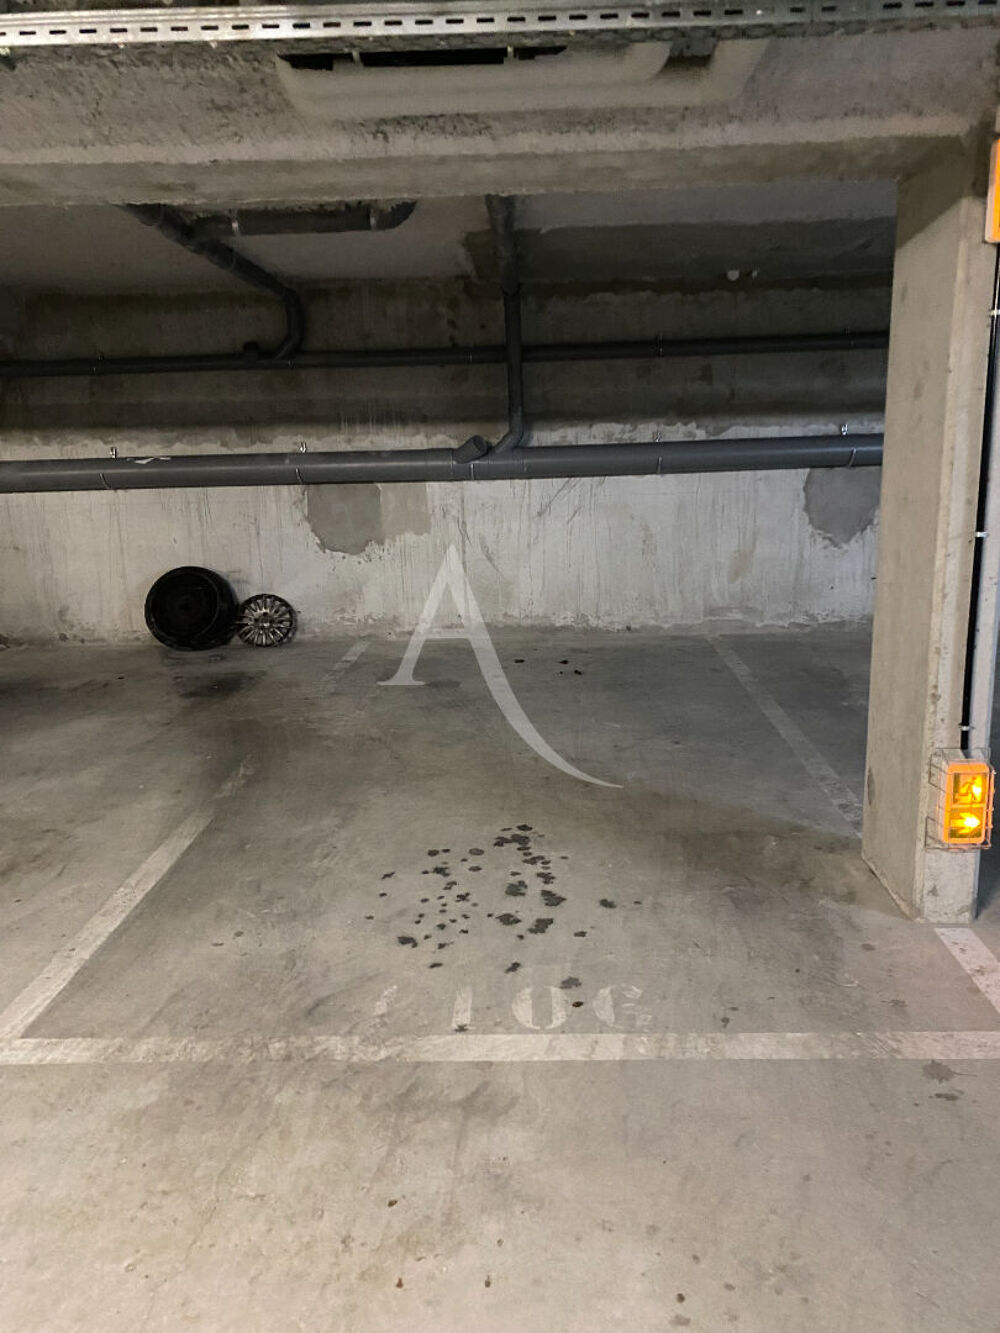 Location Parking/Garage Parking / box Carrieres Sous Poissy Carrieres sous poissy